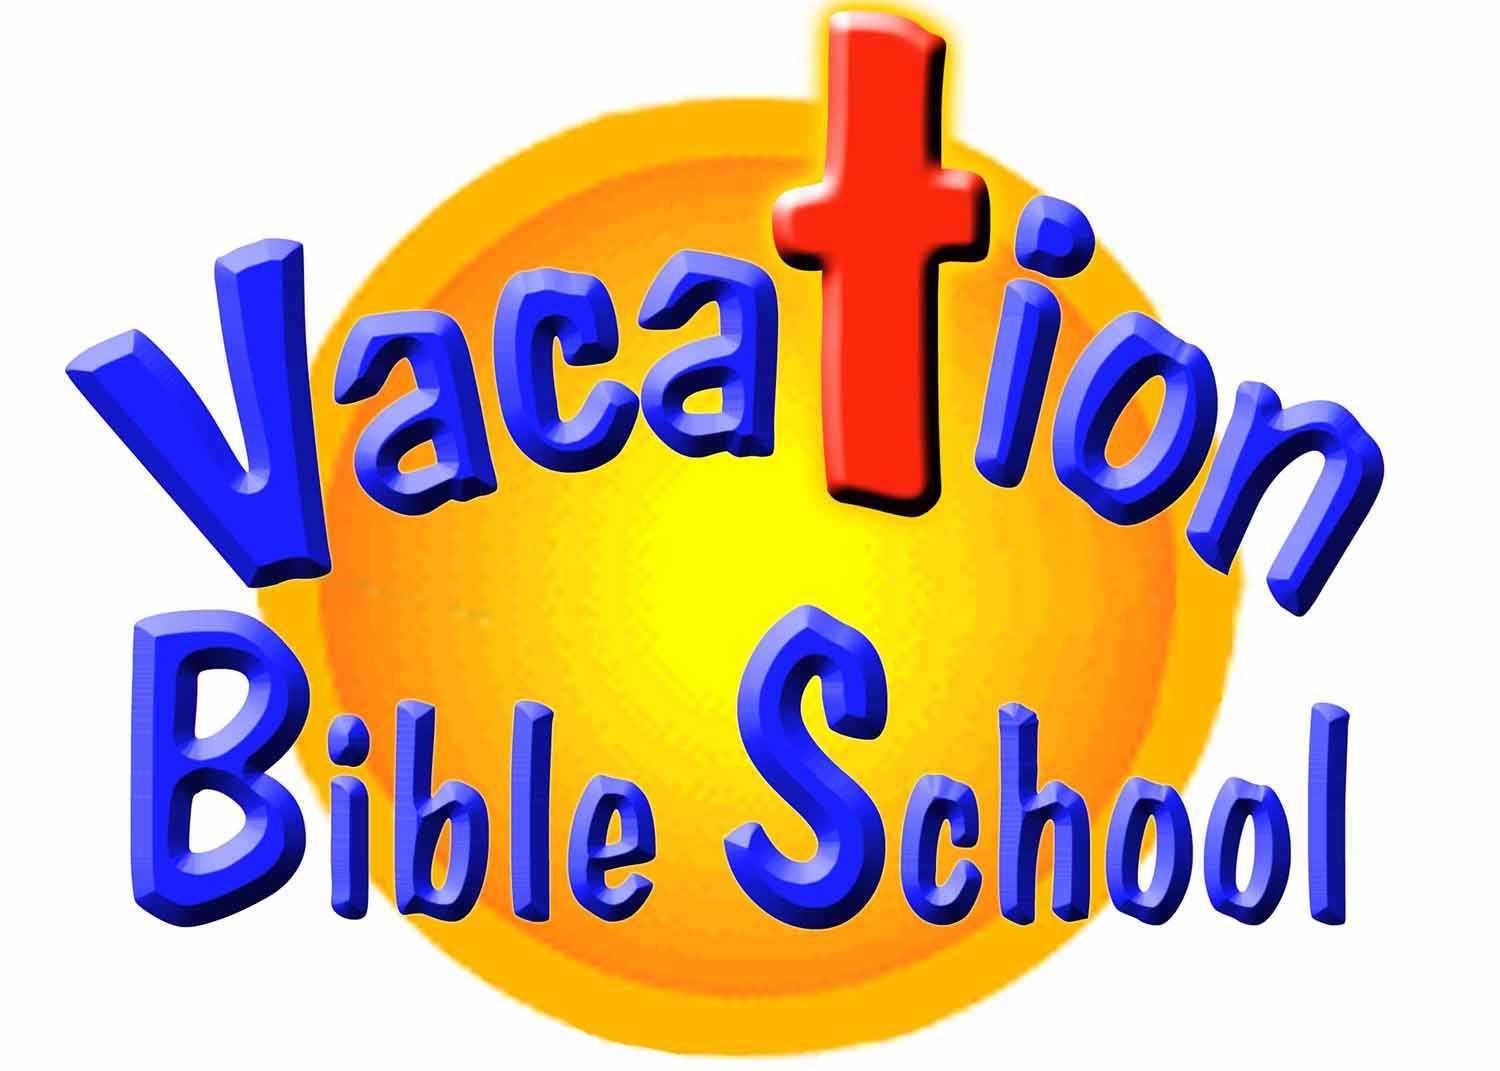 Free Vbs Training Cliparts, Download Free Clip Art, Free With Regard To Free Vbs Certificate Templates